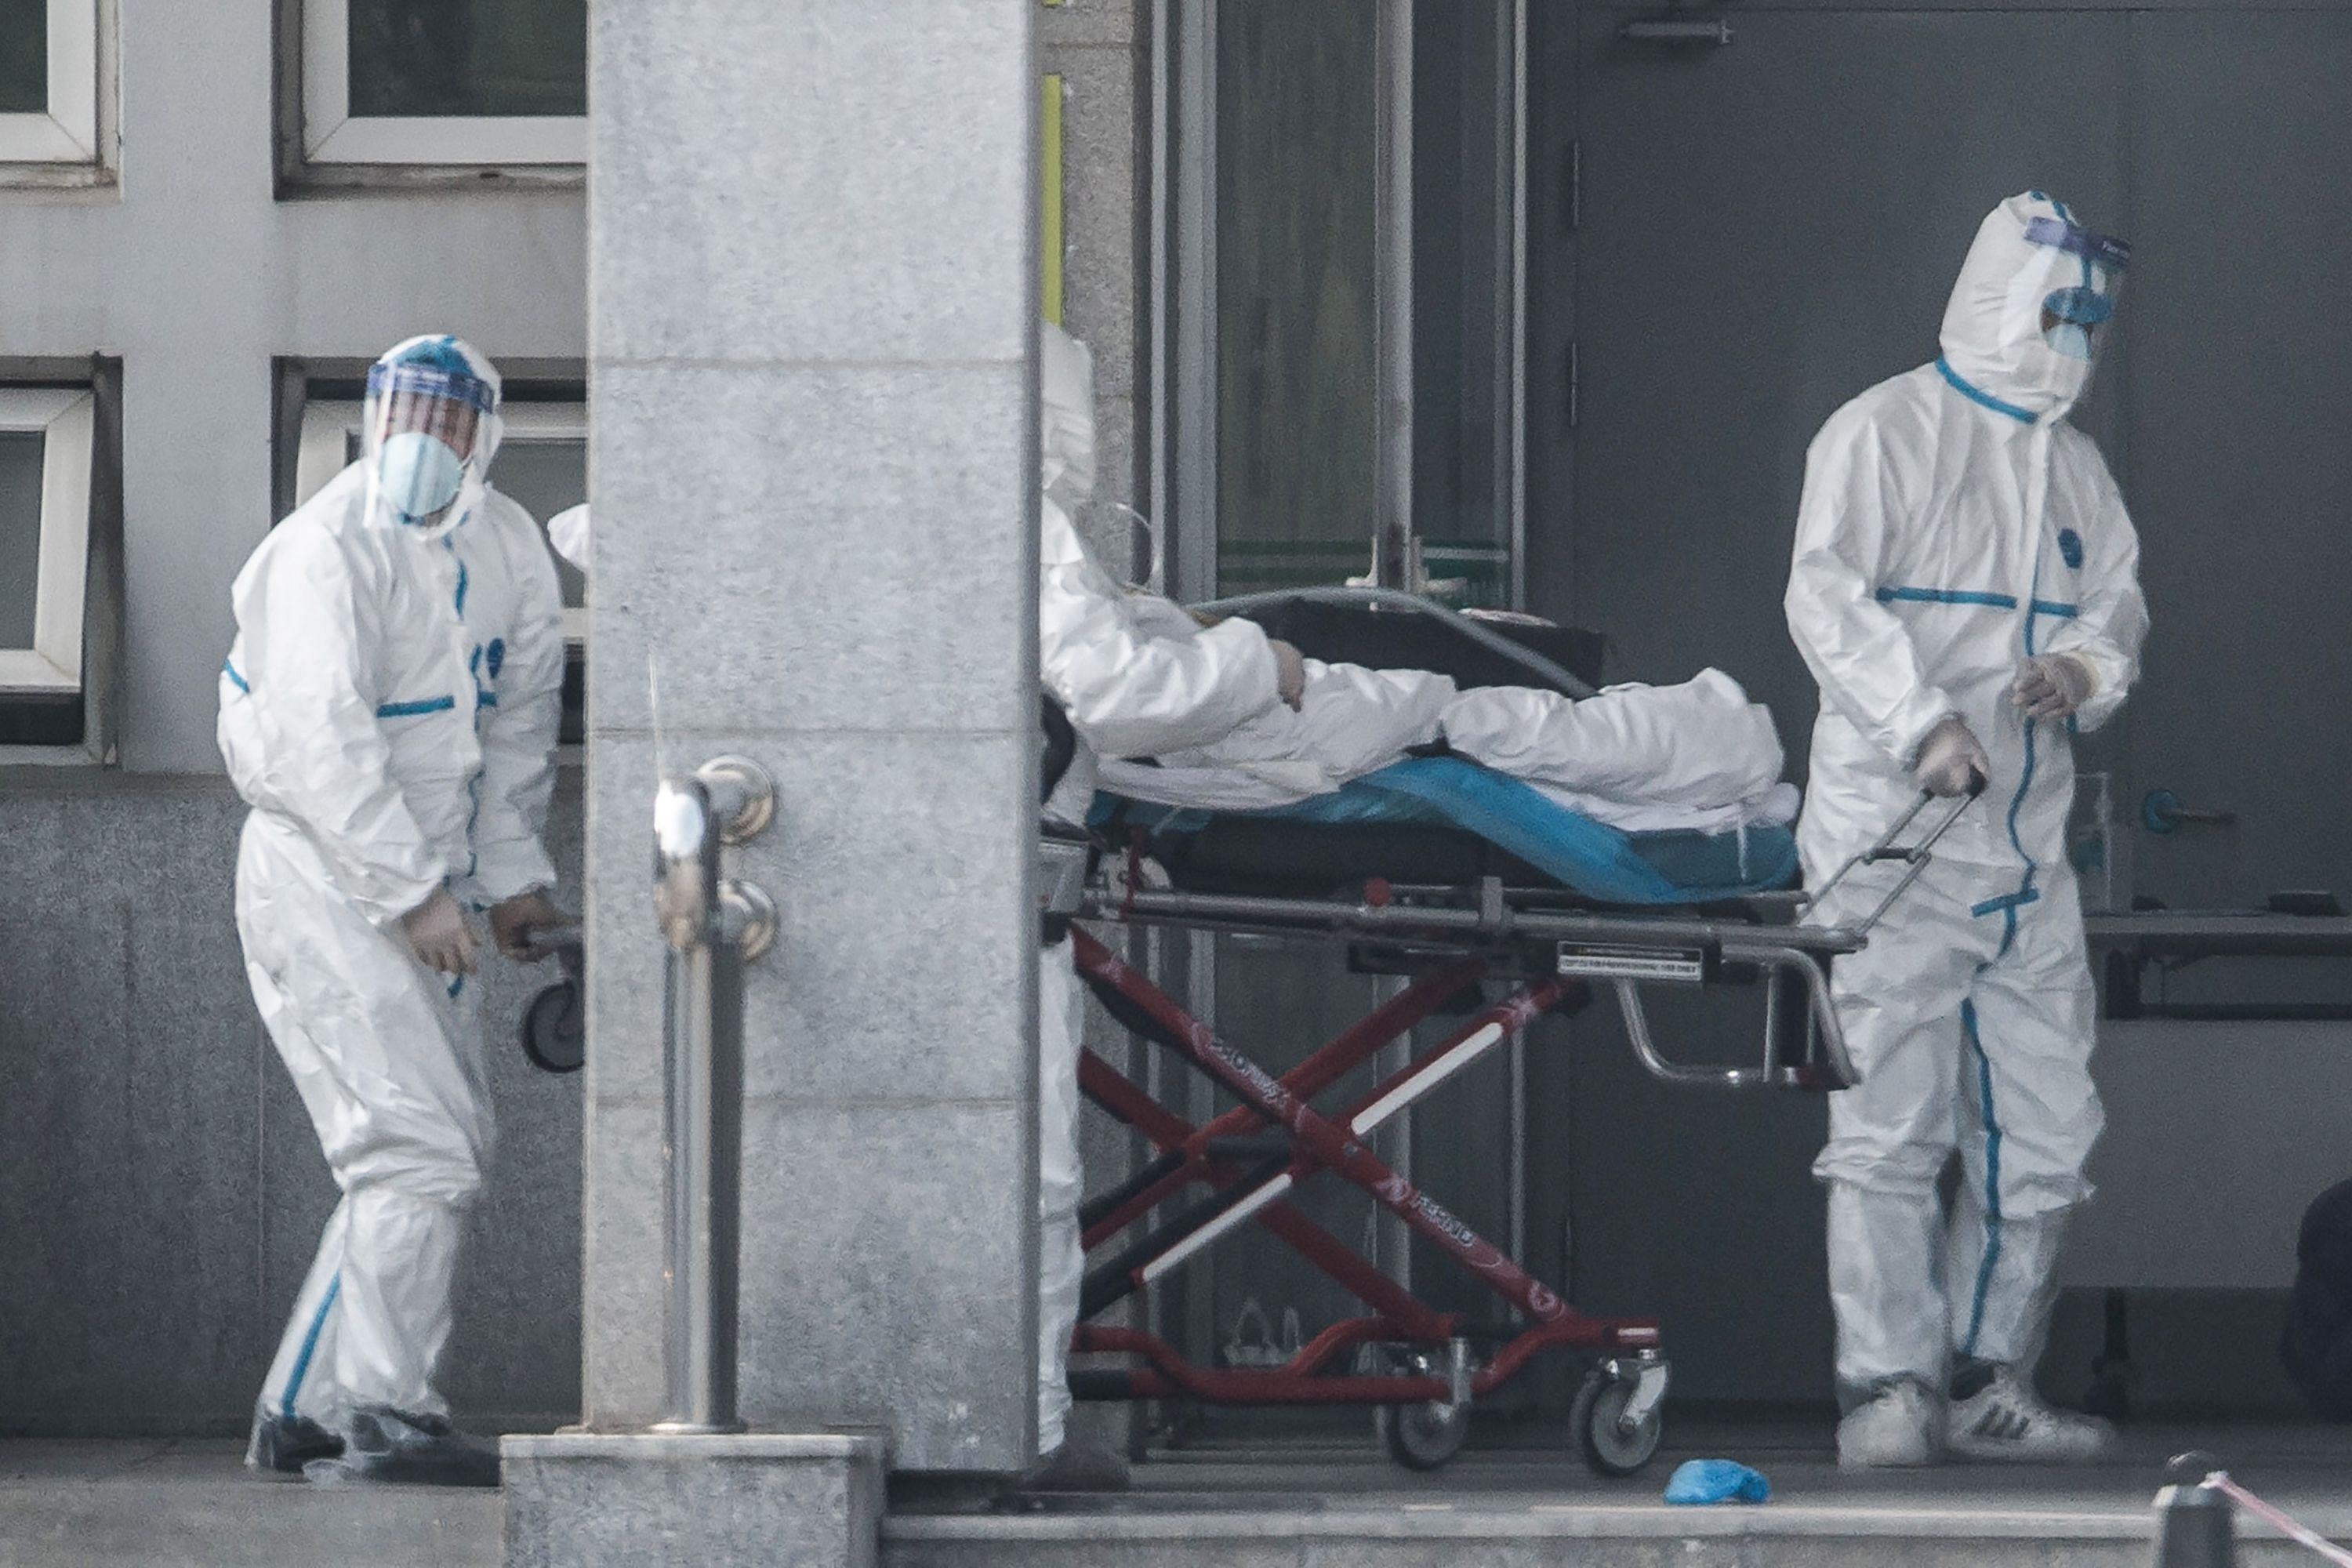 Medical staff members carry a patient into the Jinyintan hospital, where patients infected by a mysterious SARS-like virus are being treated, in Wuhan in China's central Hubei province. (AFP)